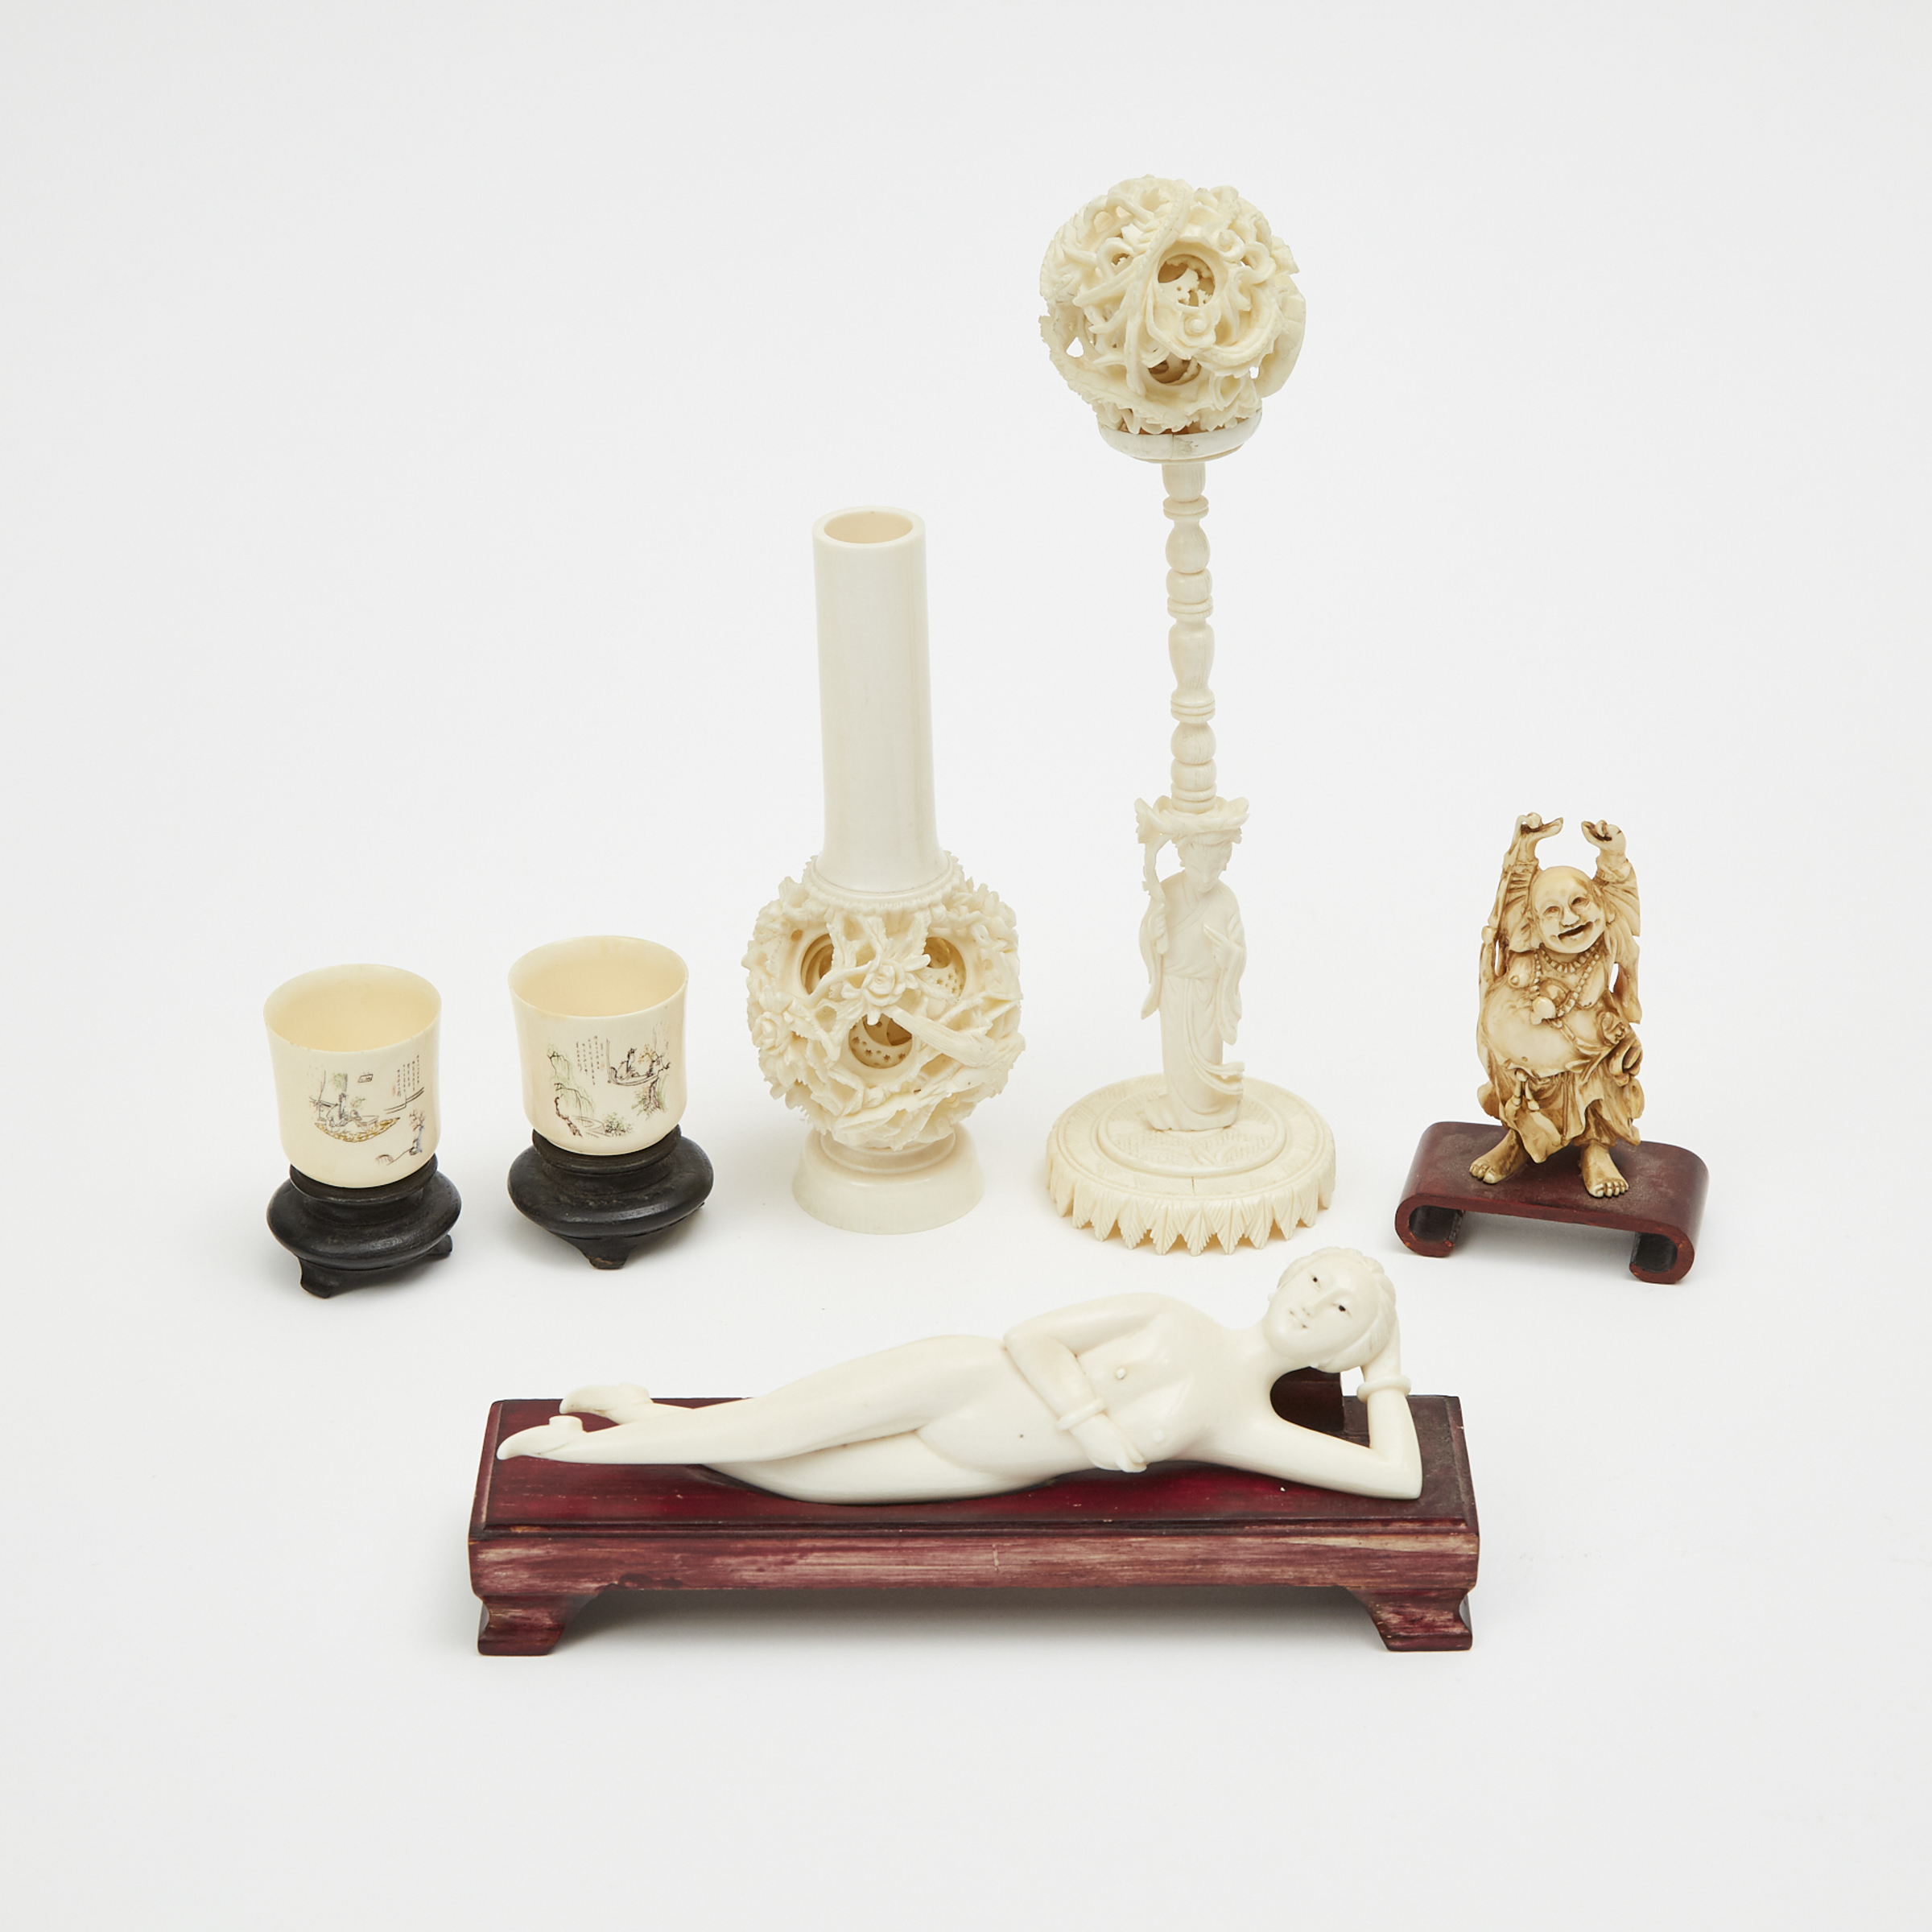 A Group of Six Chinese Ivory Carvings, Early 20th Century